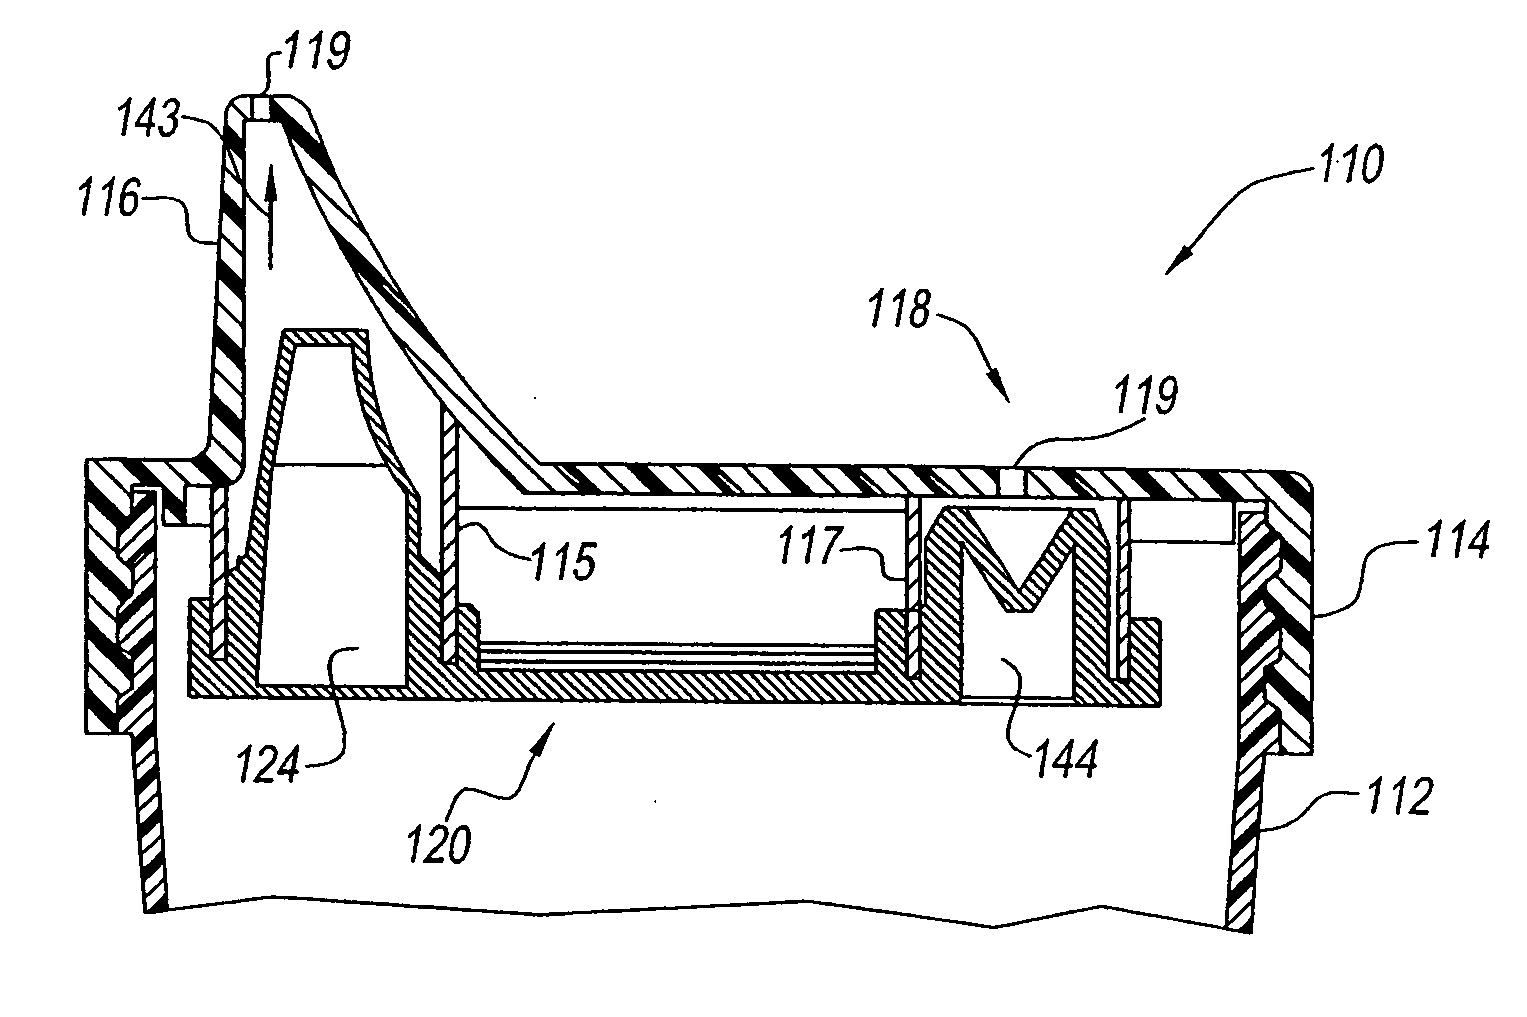 Flow control element for use with leak-proof cup assemblies